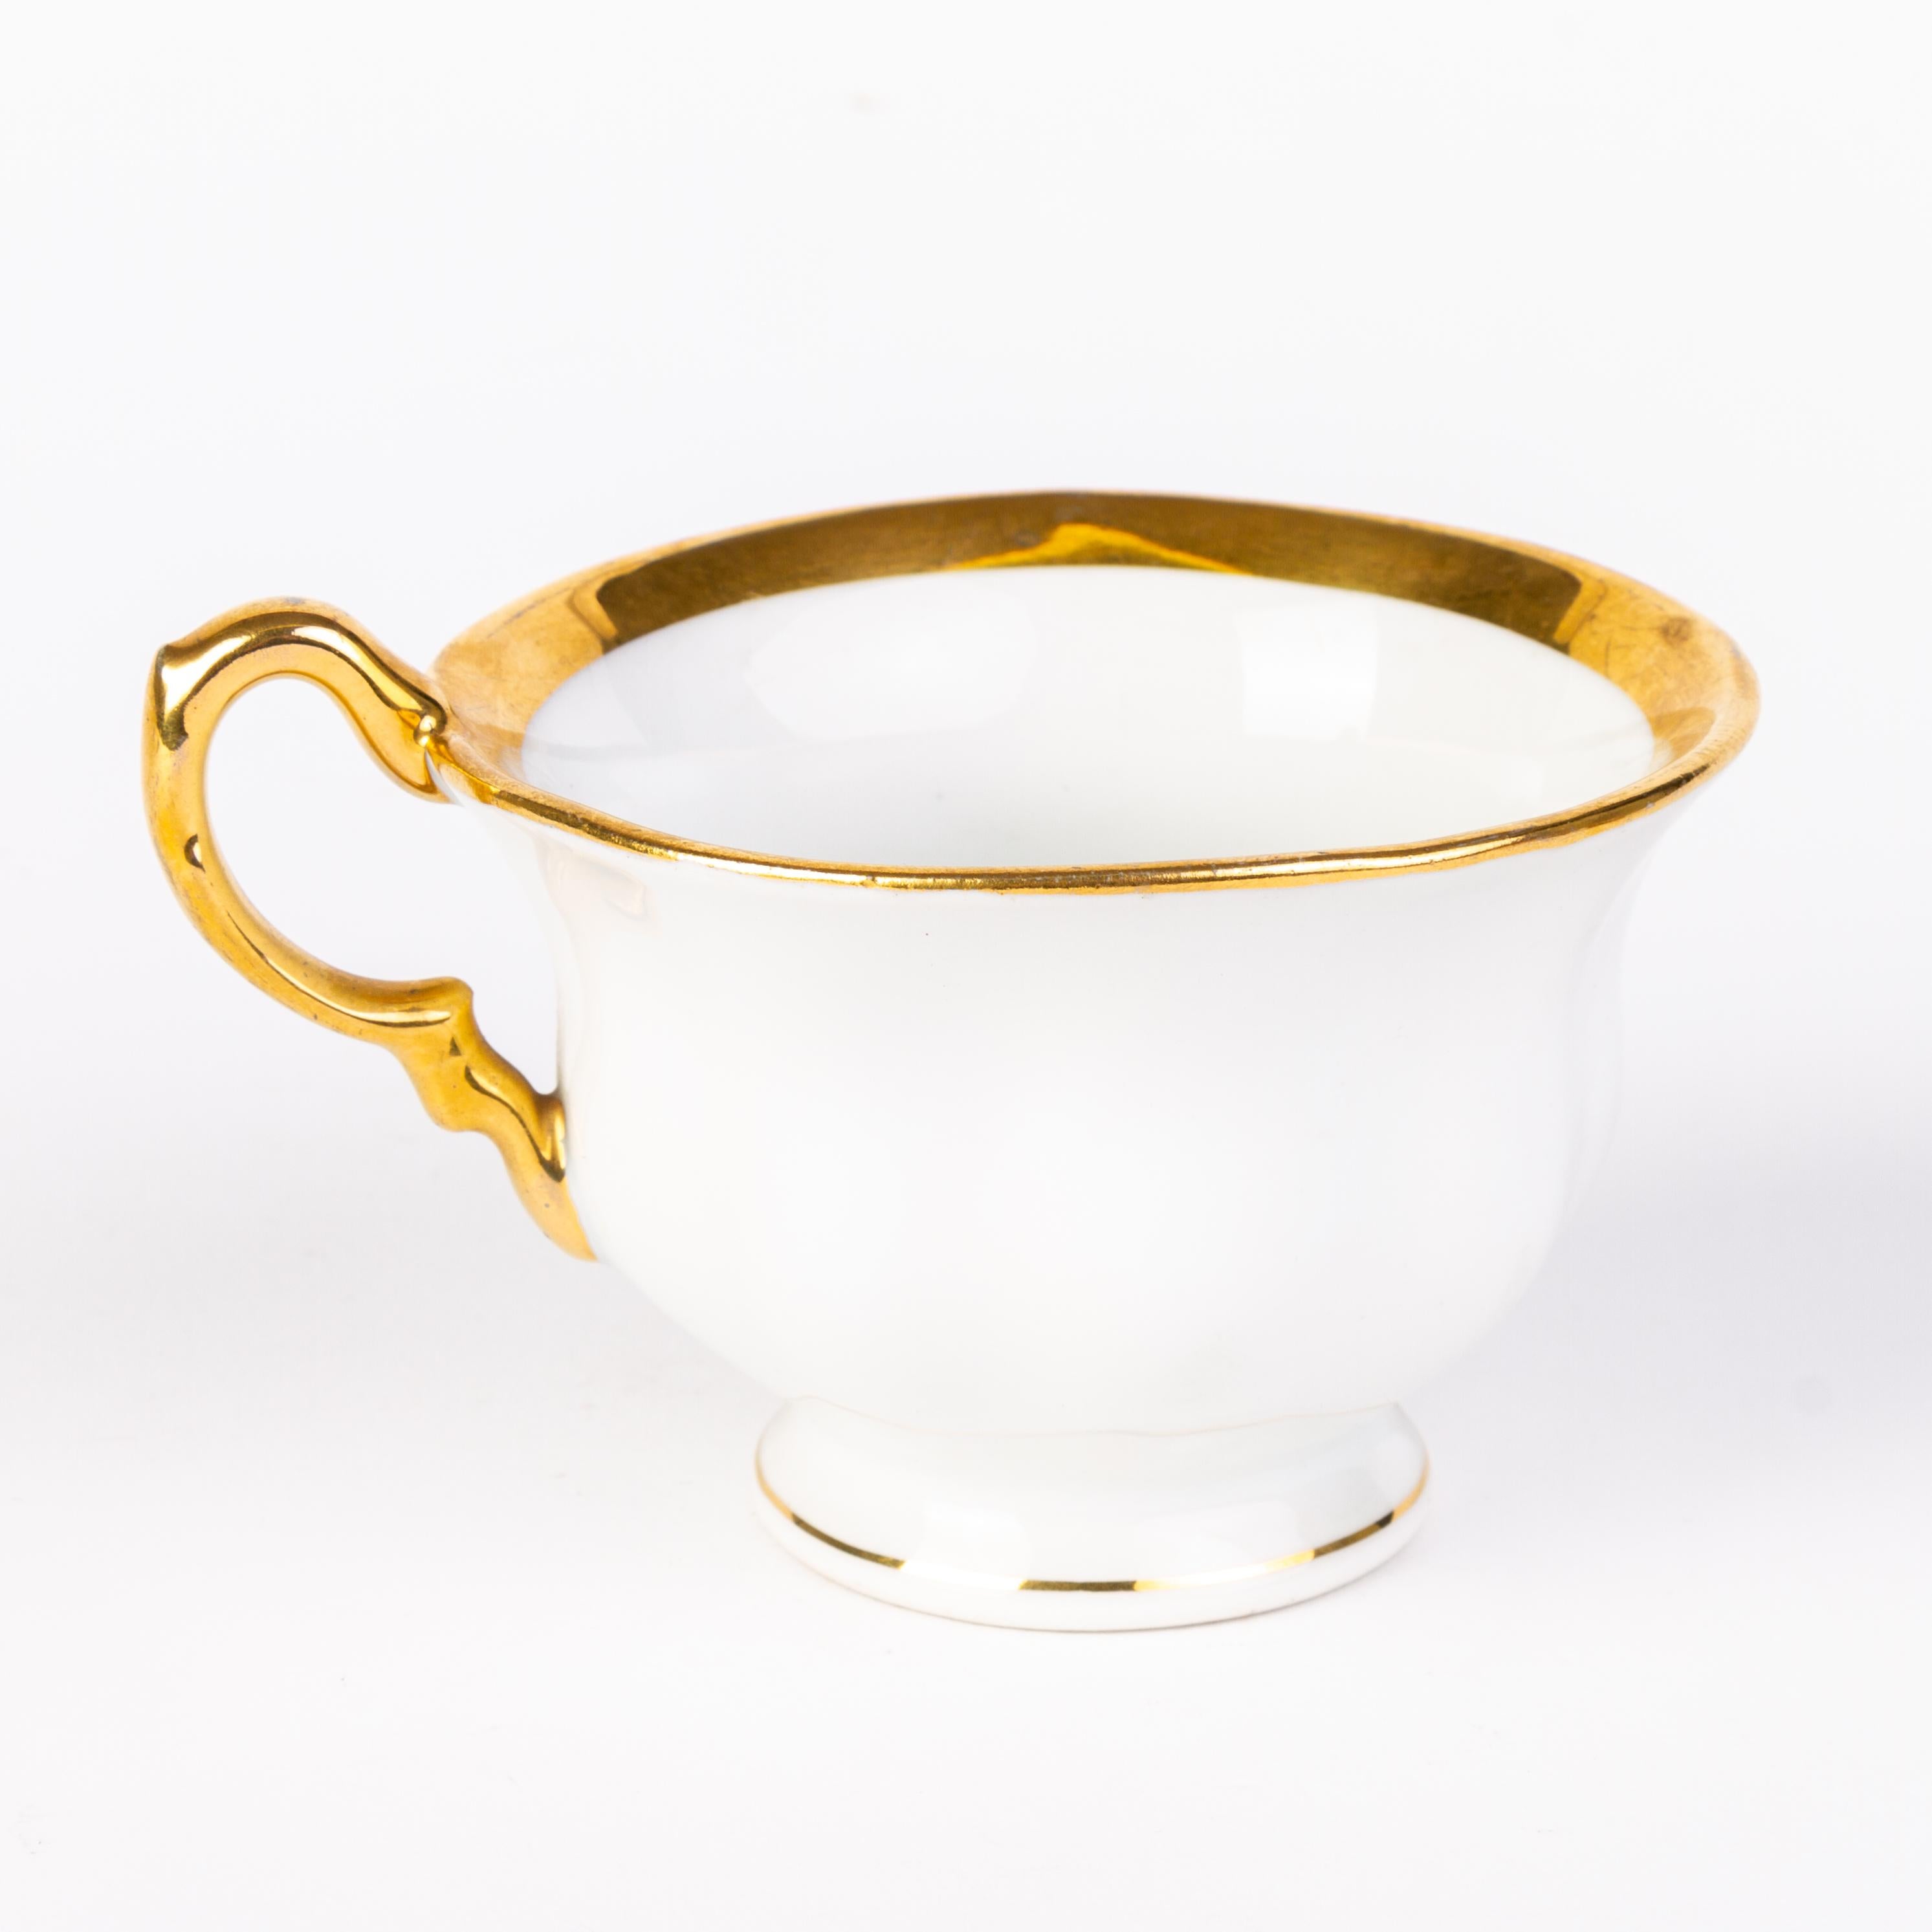 C.T. Altwasser German Fine Gilt Porcelain Teacup 19th Century
Good condition, as seen
From a private collection
Free international shipping.